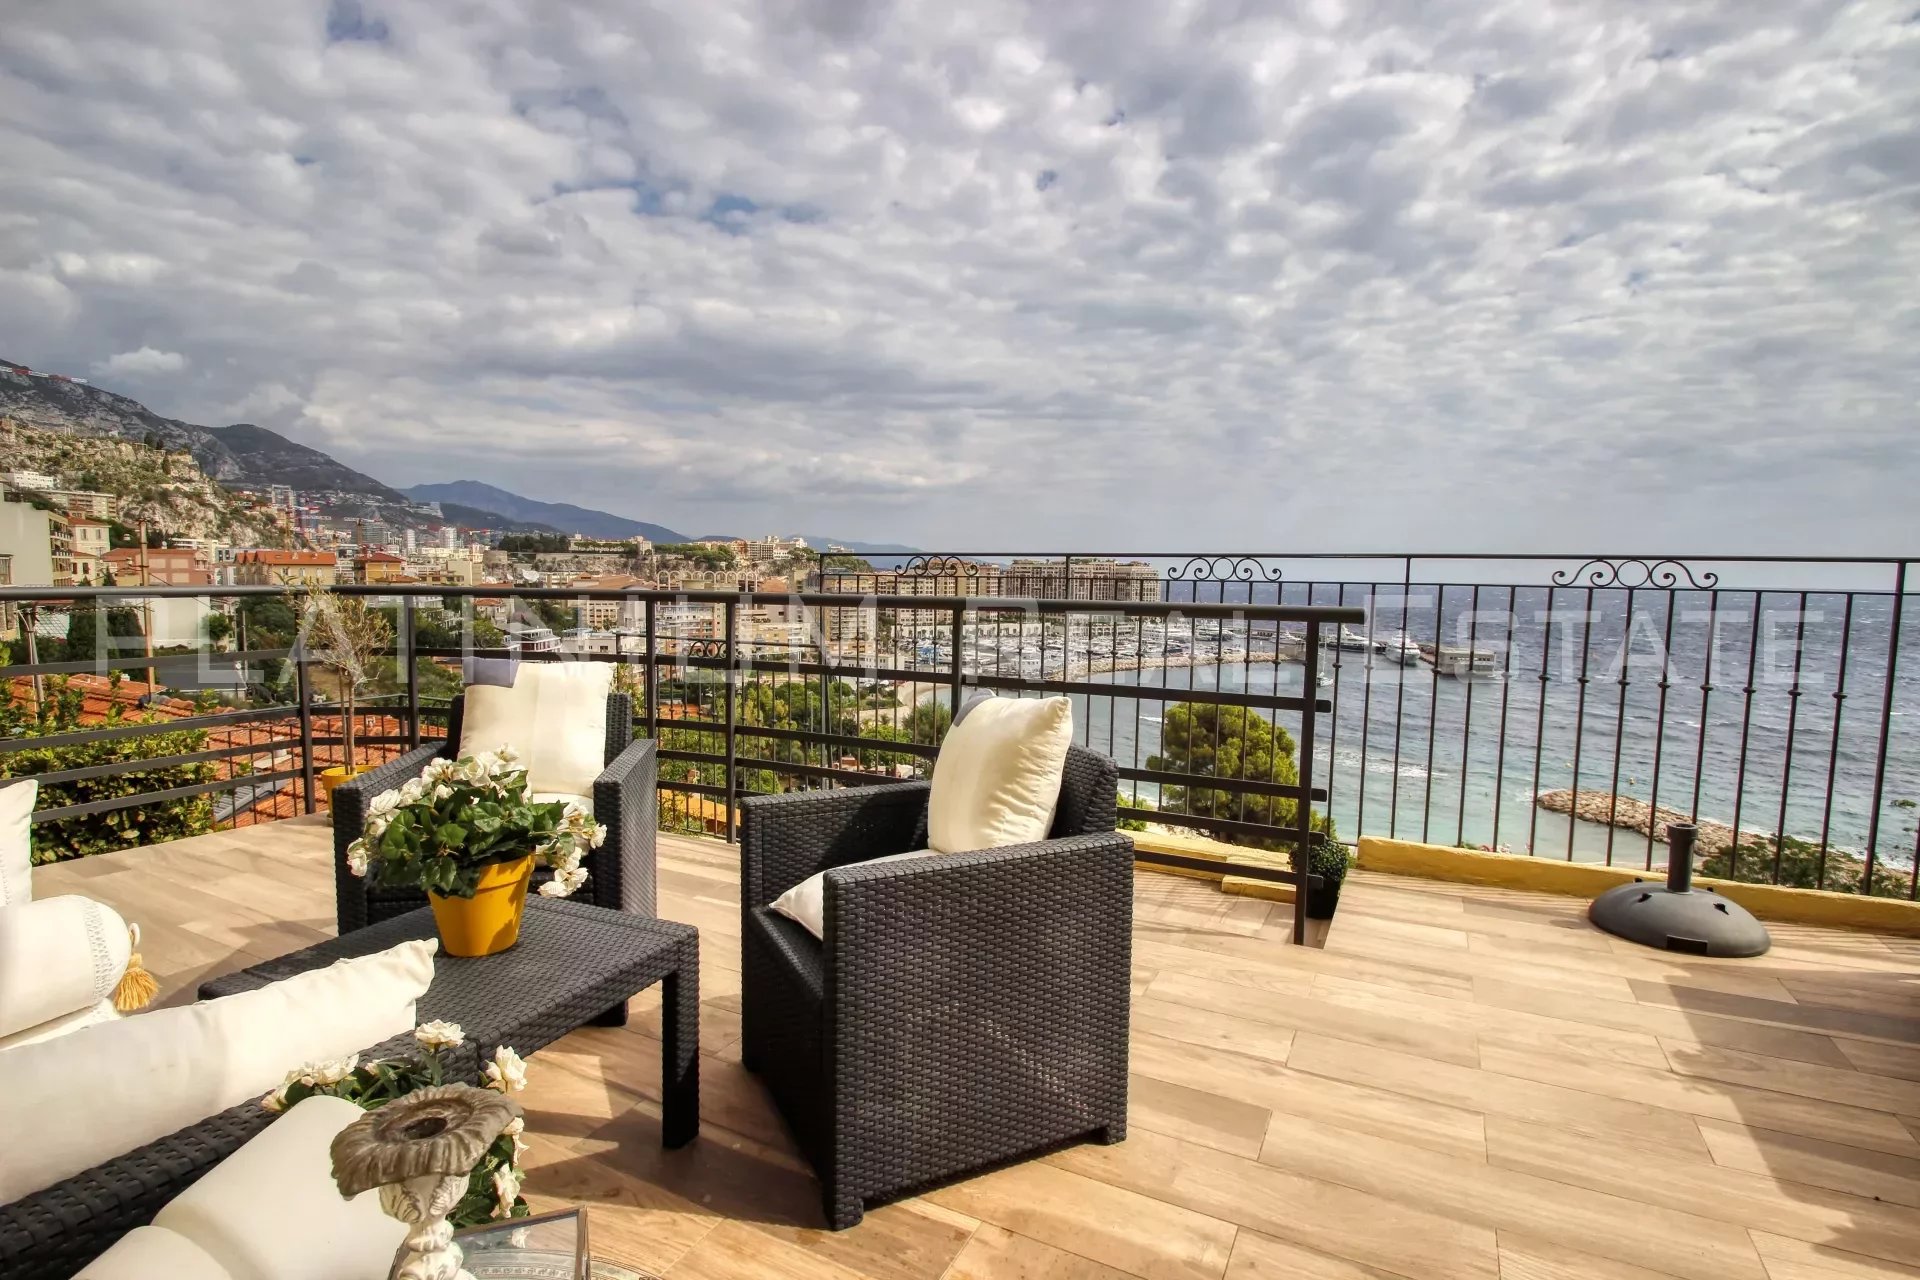 CAP D'AIL "NEARBY MONACO" - HOTEL PARTICULIER 4P 190M² | PANORAMIC SEA VIEW | TERRACES | GARAGE